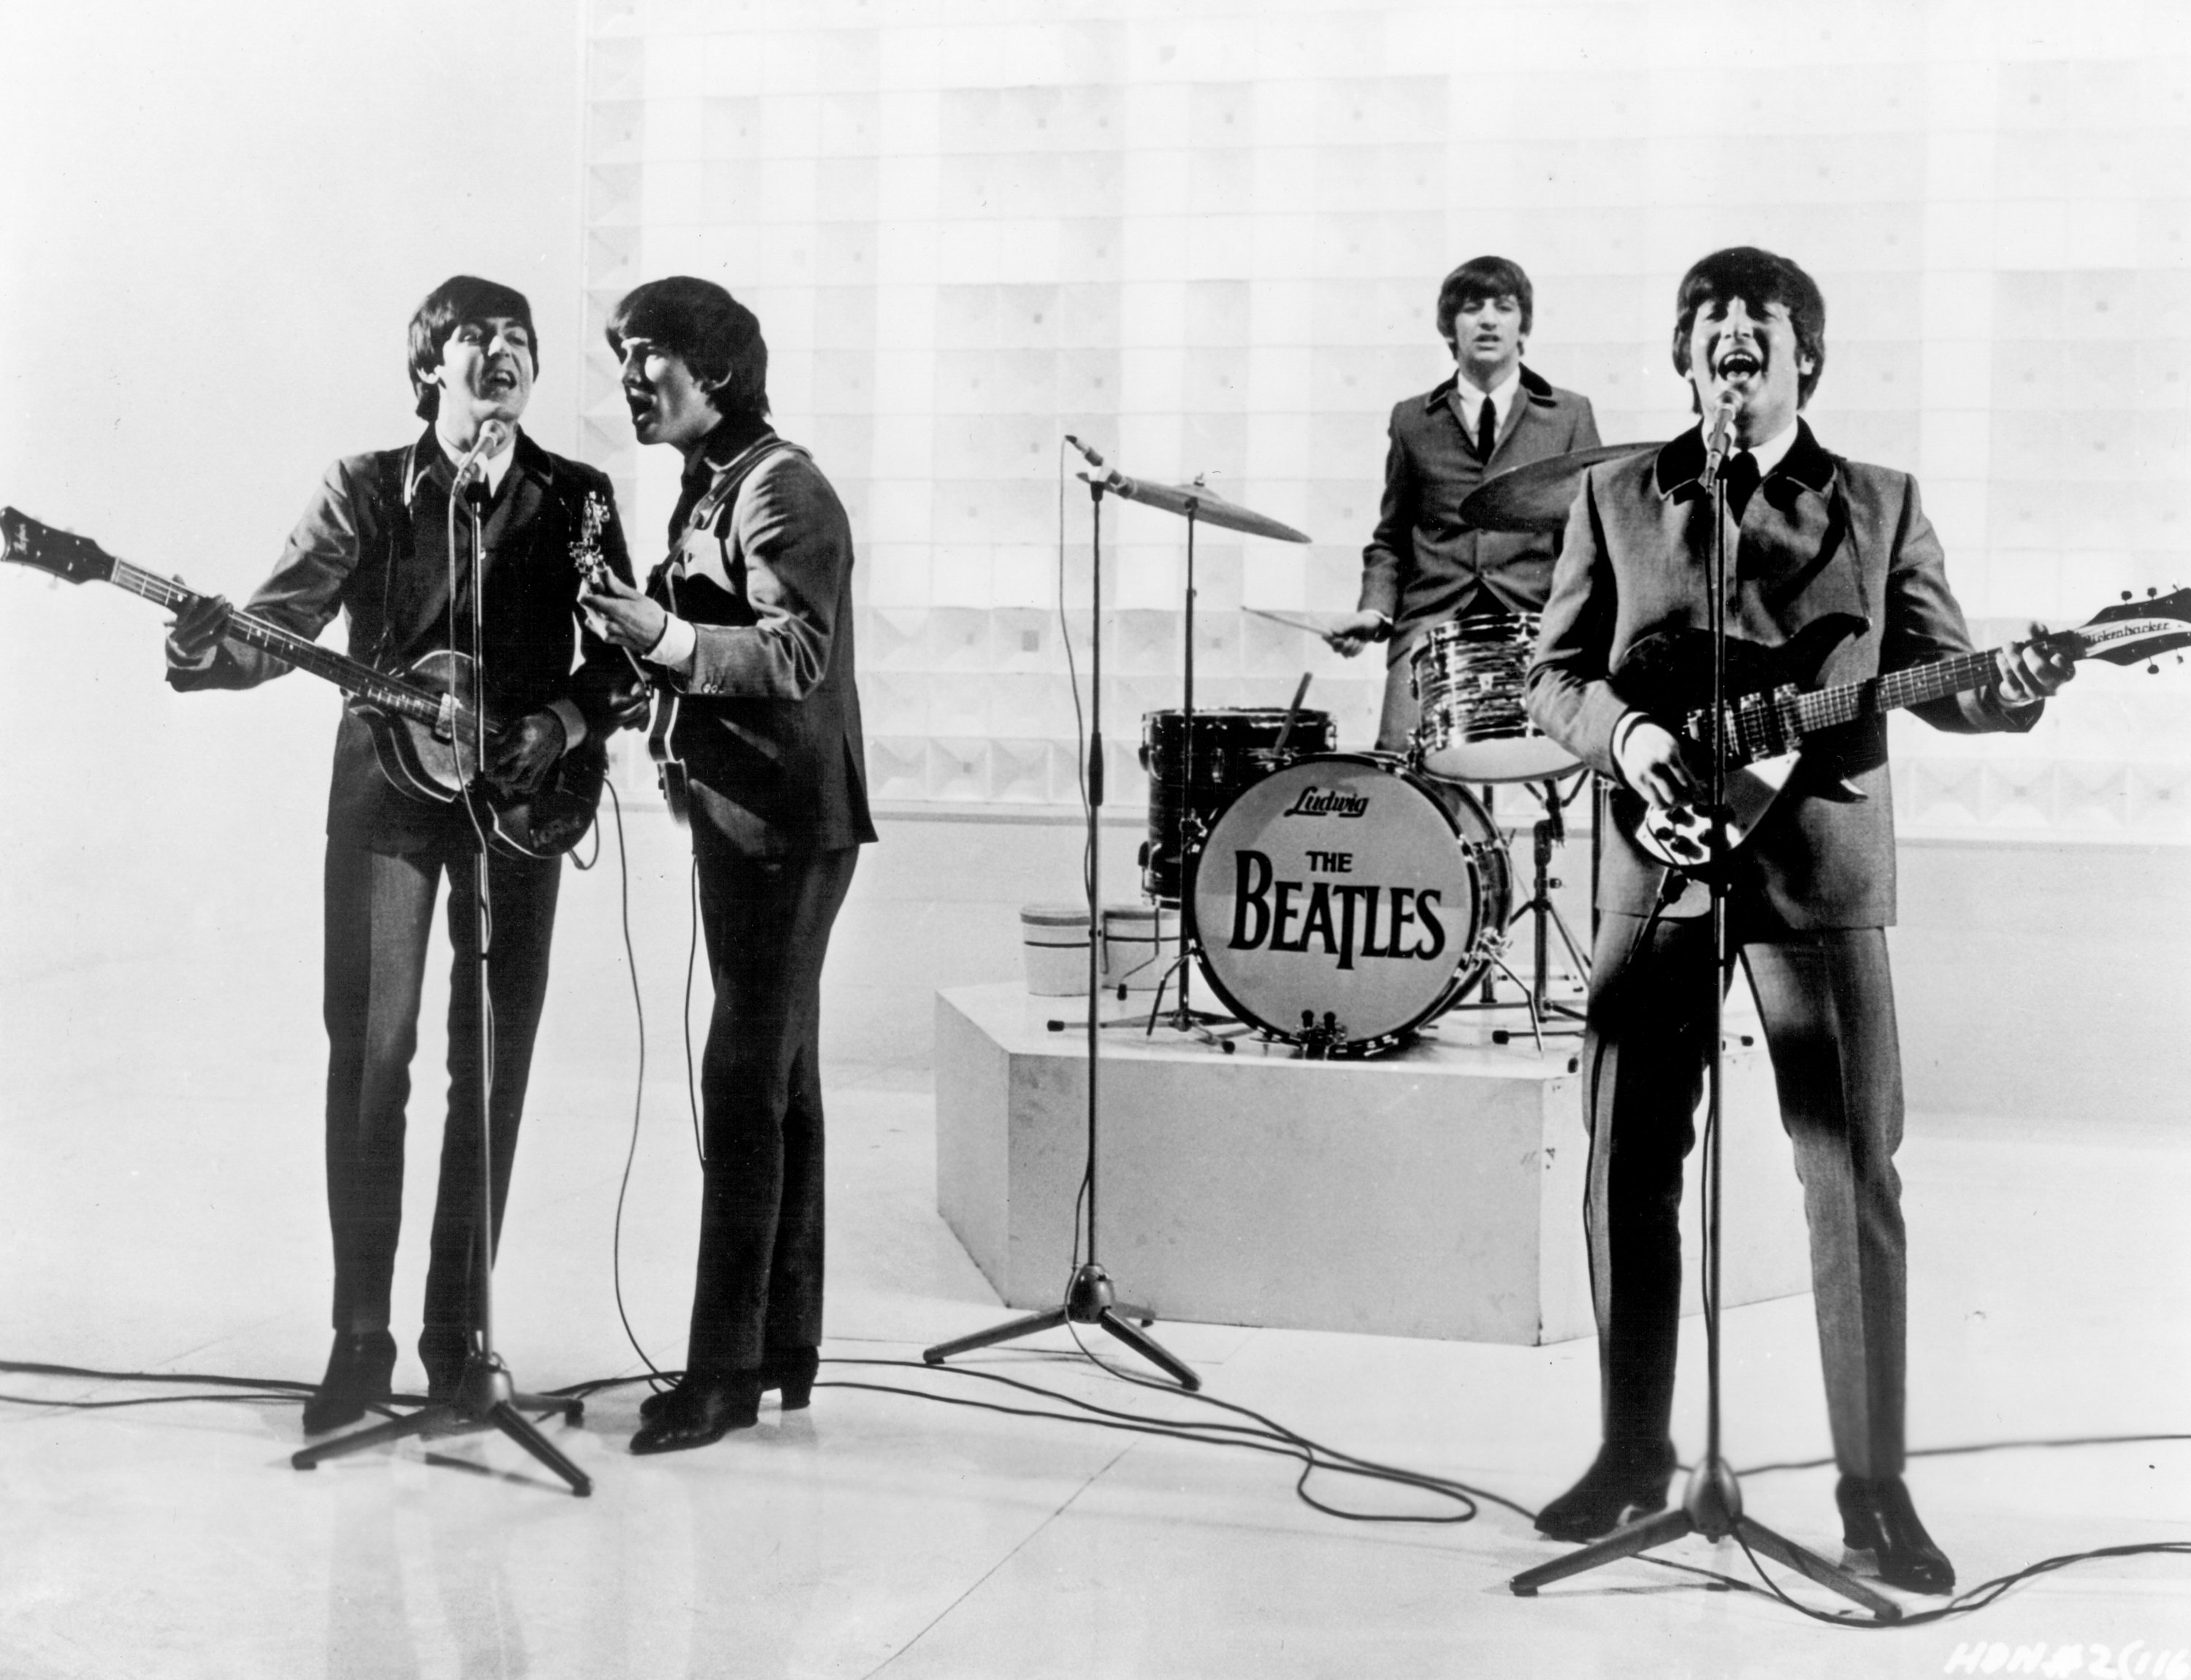 The Beatles playing instruments